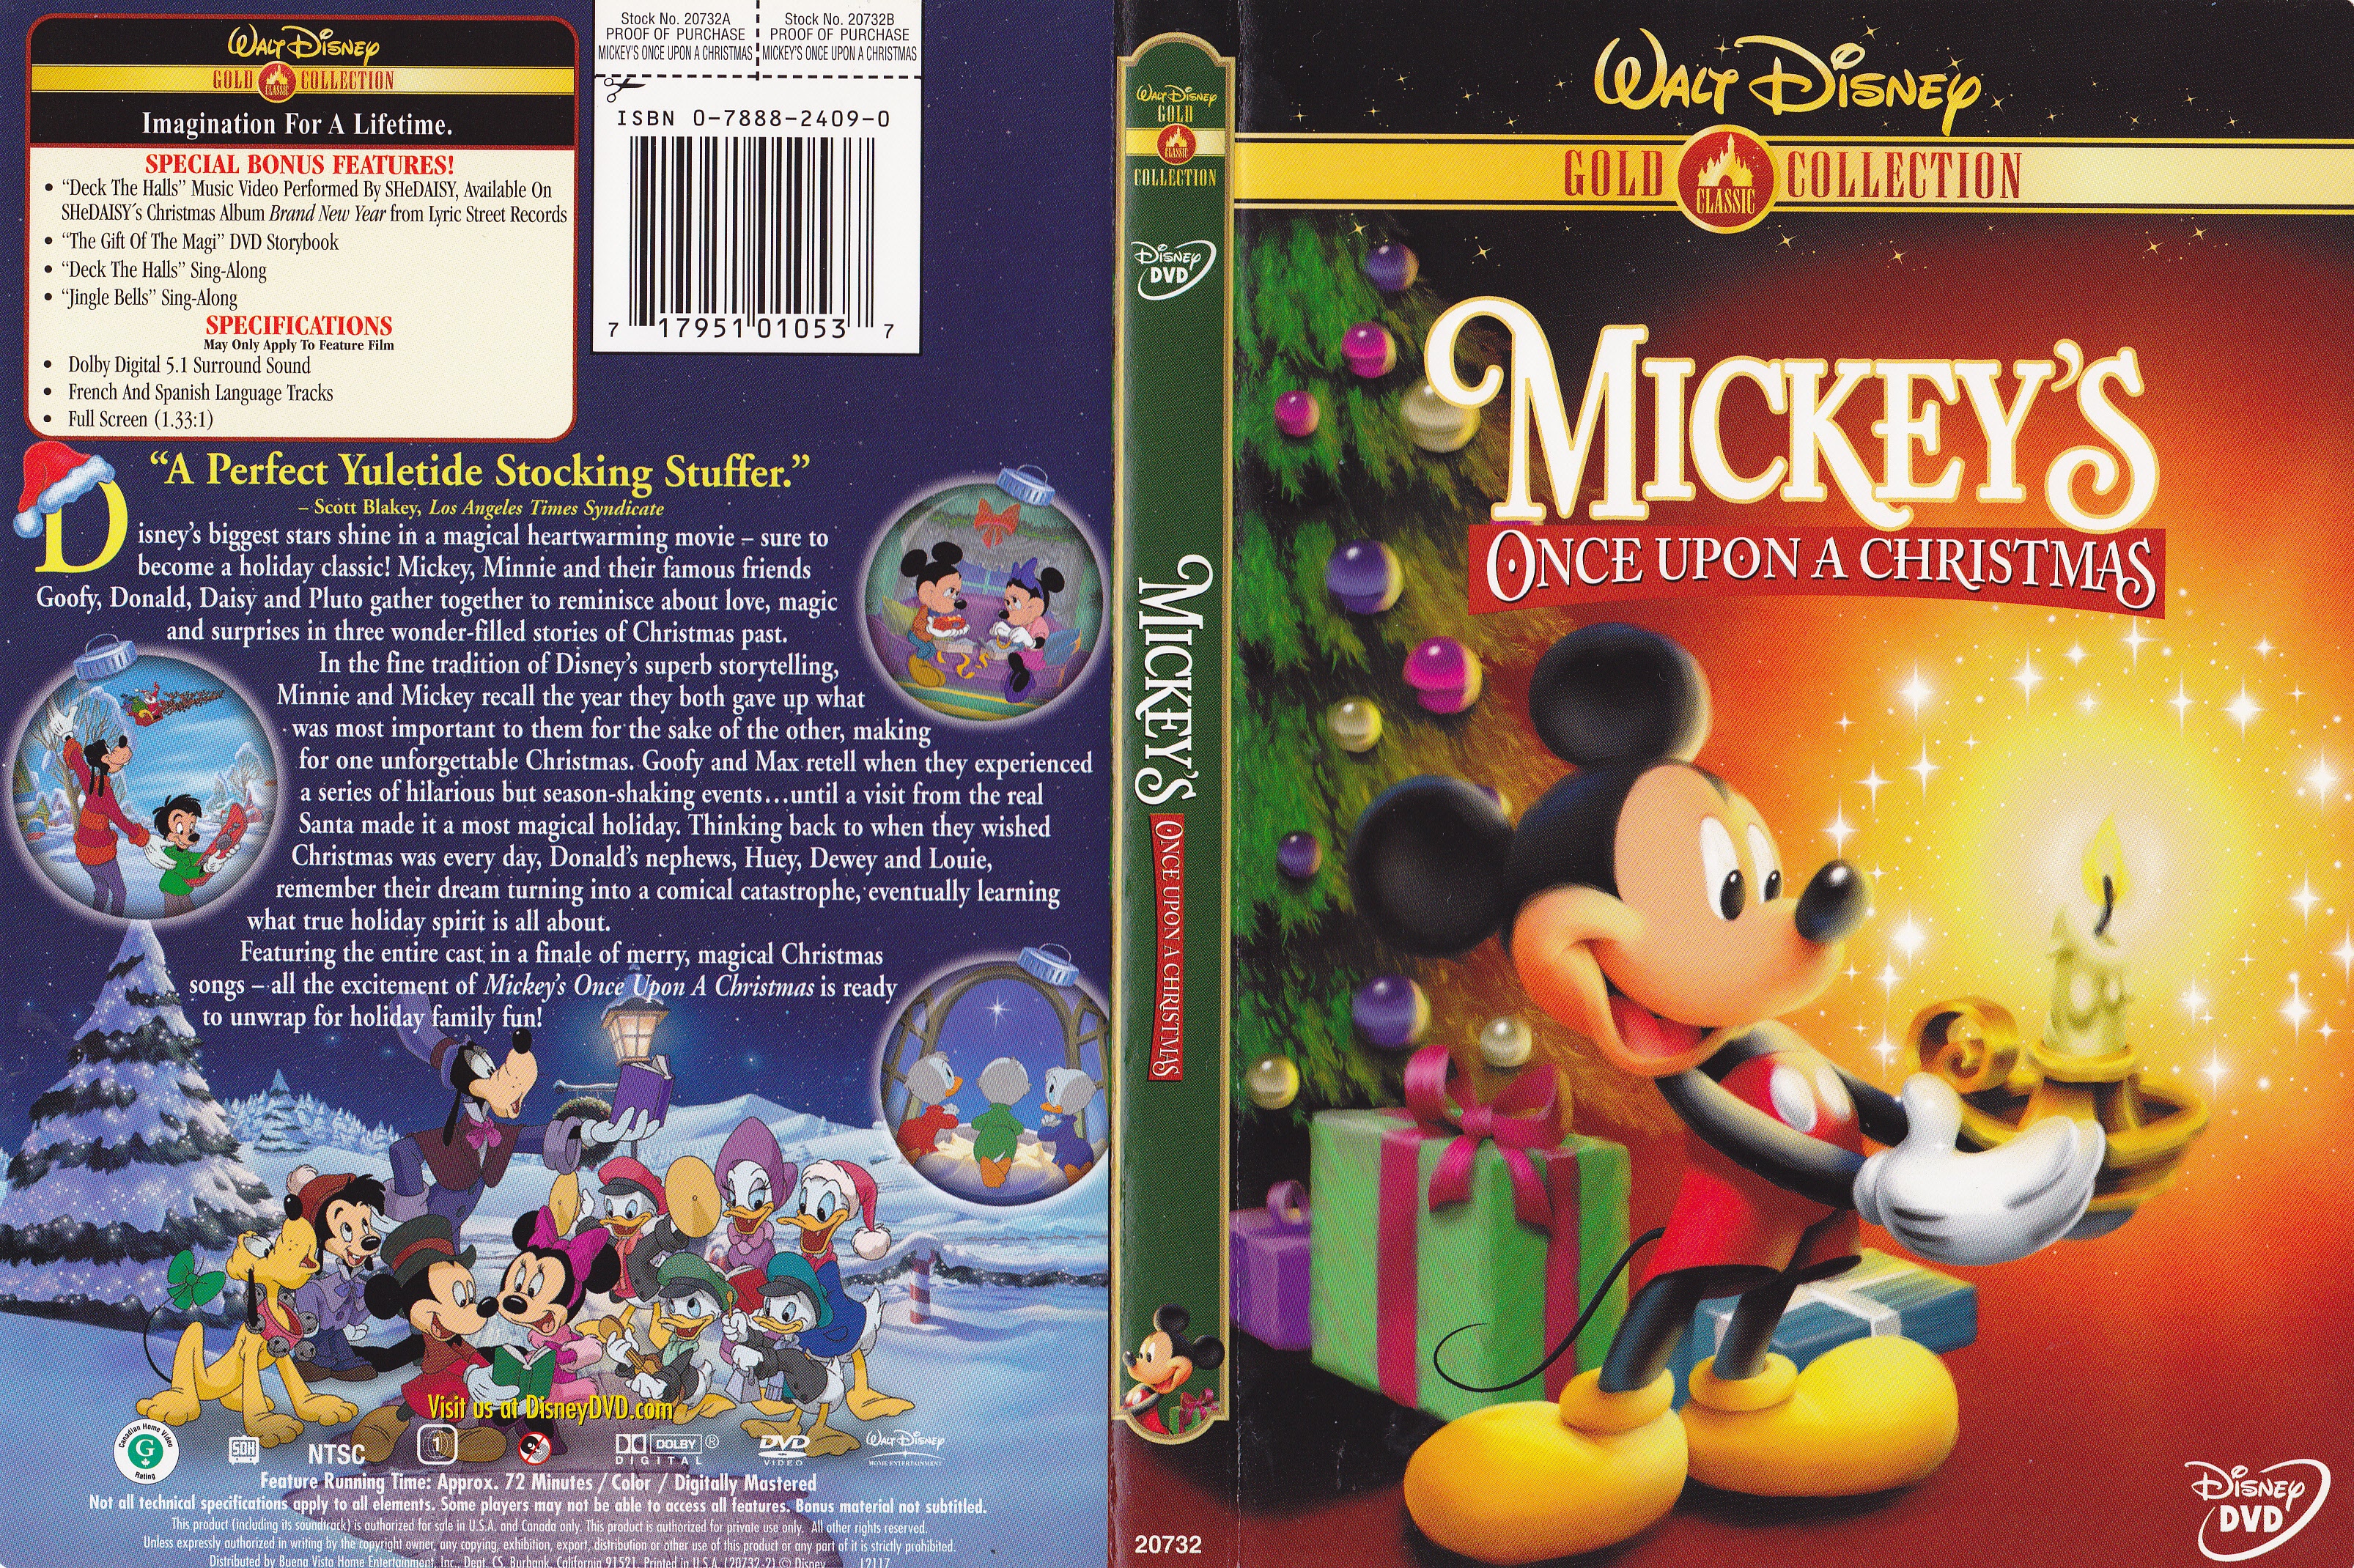 Jaquette DVD Mickey